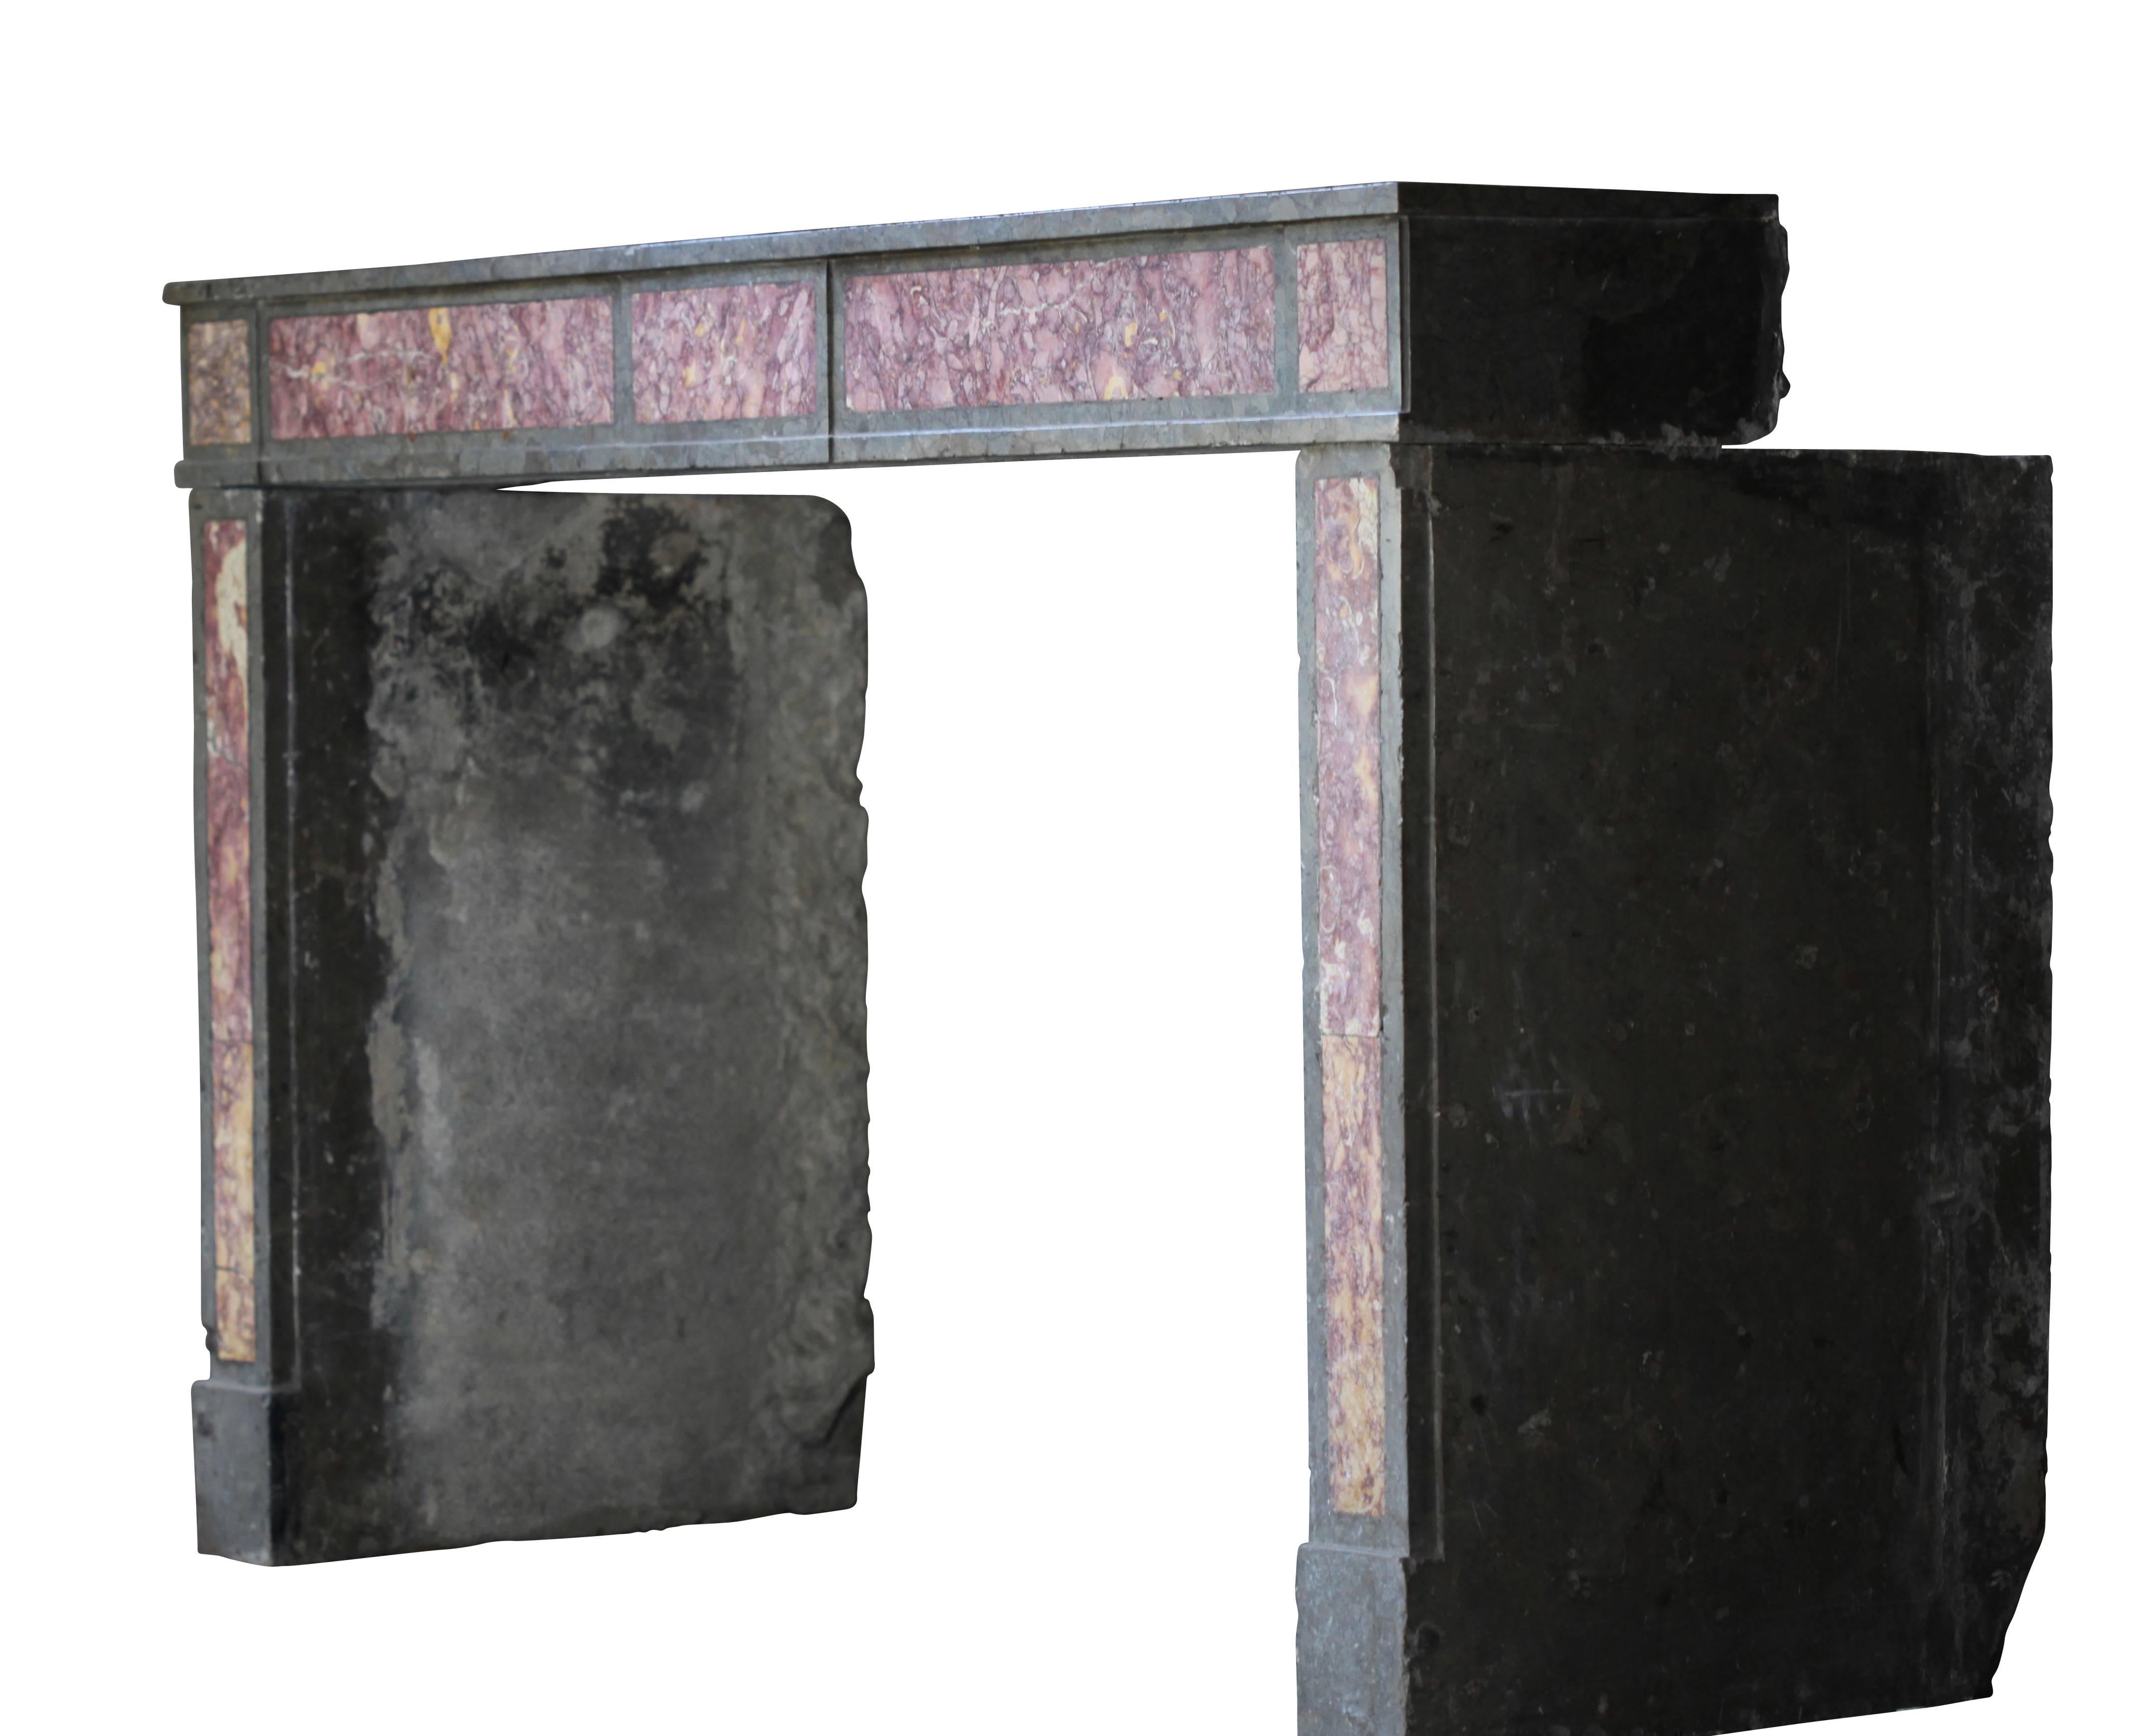 This rare stone antique fireplace mantel (fireplace) with marble inlay has a great patina with signs of aging. it is a great vintage chimney piece for a contemporary interior. 
Measures: 
178 cm EW 70,08